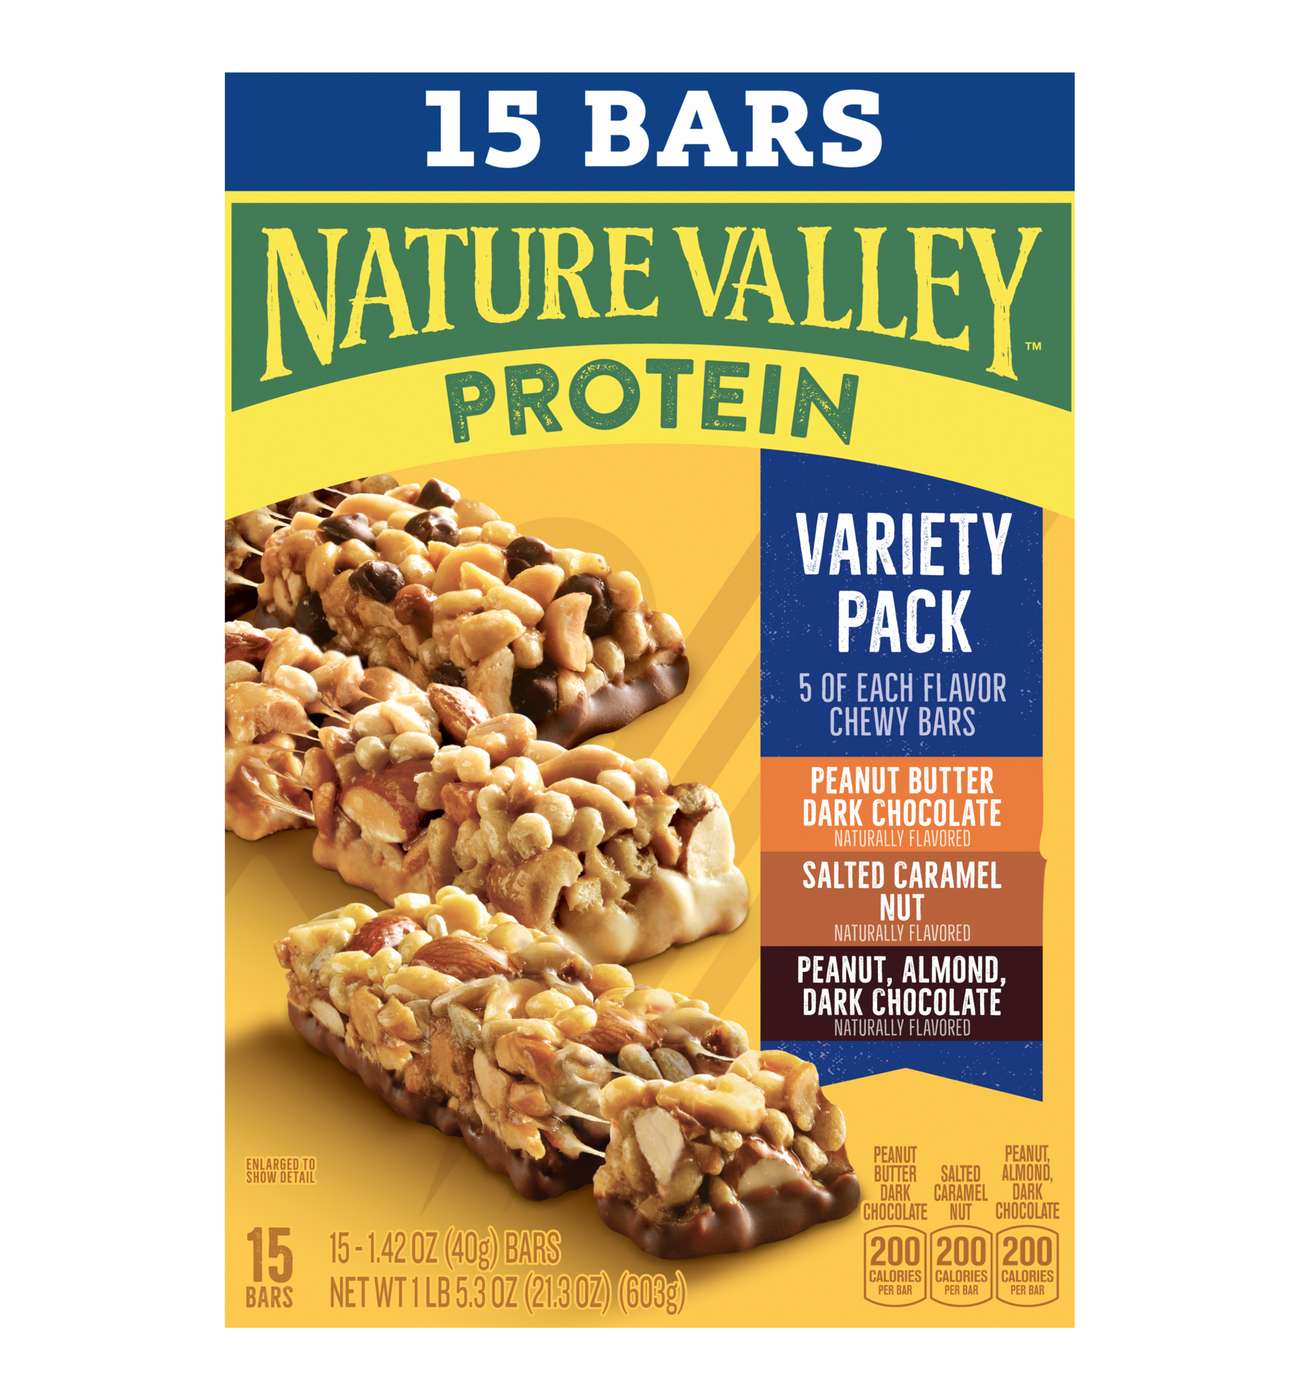 Protein Chewy Bars Variety Pack